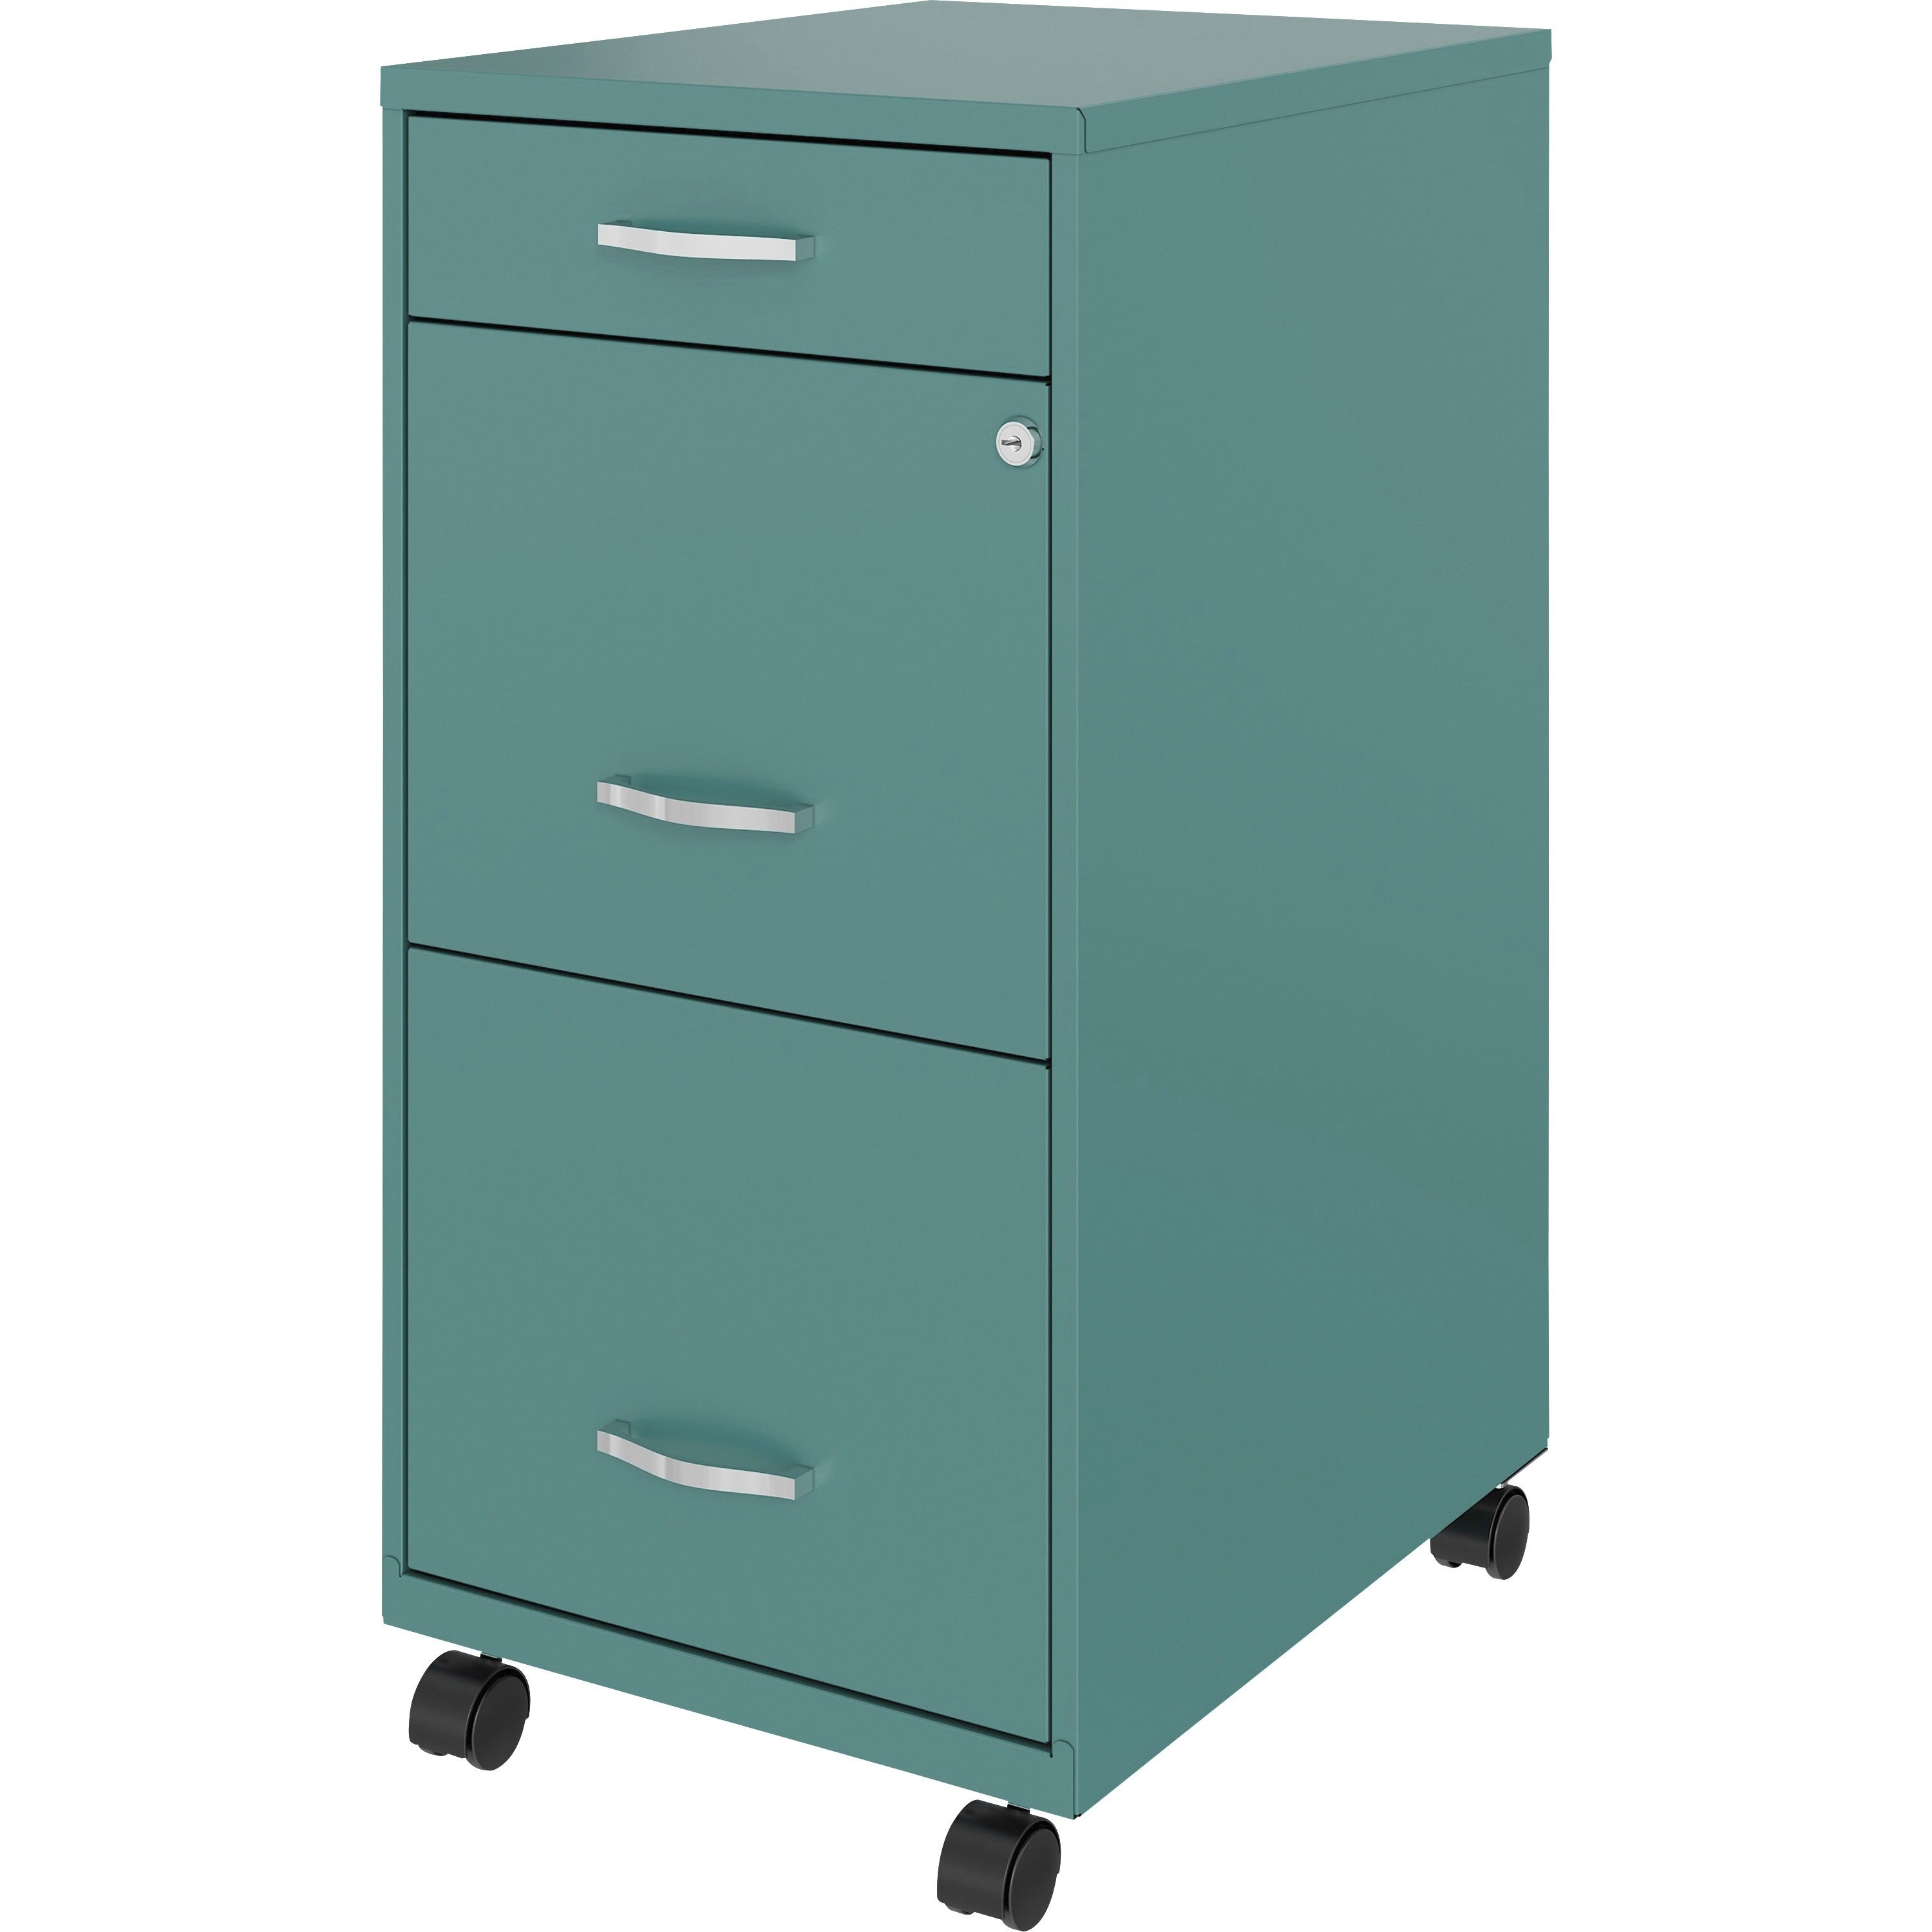 nusparc-mobile-file-cabinet-142-x-18-x-295-3-x-drawers-for-file-box-letter-mobility-locking-drawer-glide-suspension-3-4-drawer-extension-cam-lock-nonporous-surface-teal-painted-steel-recycled_nprvf318bmtl - 3